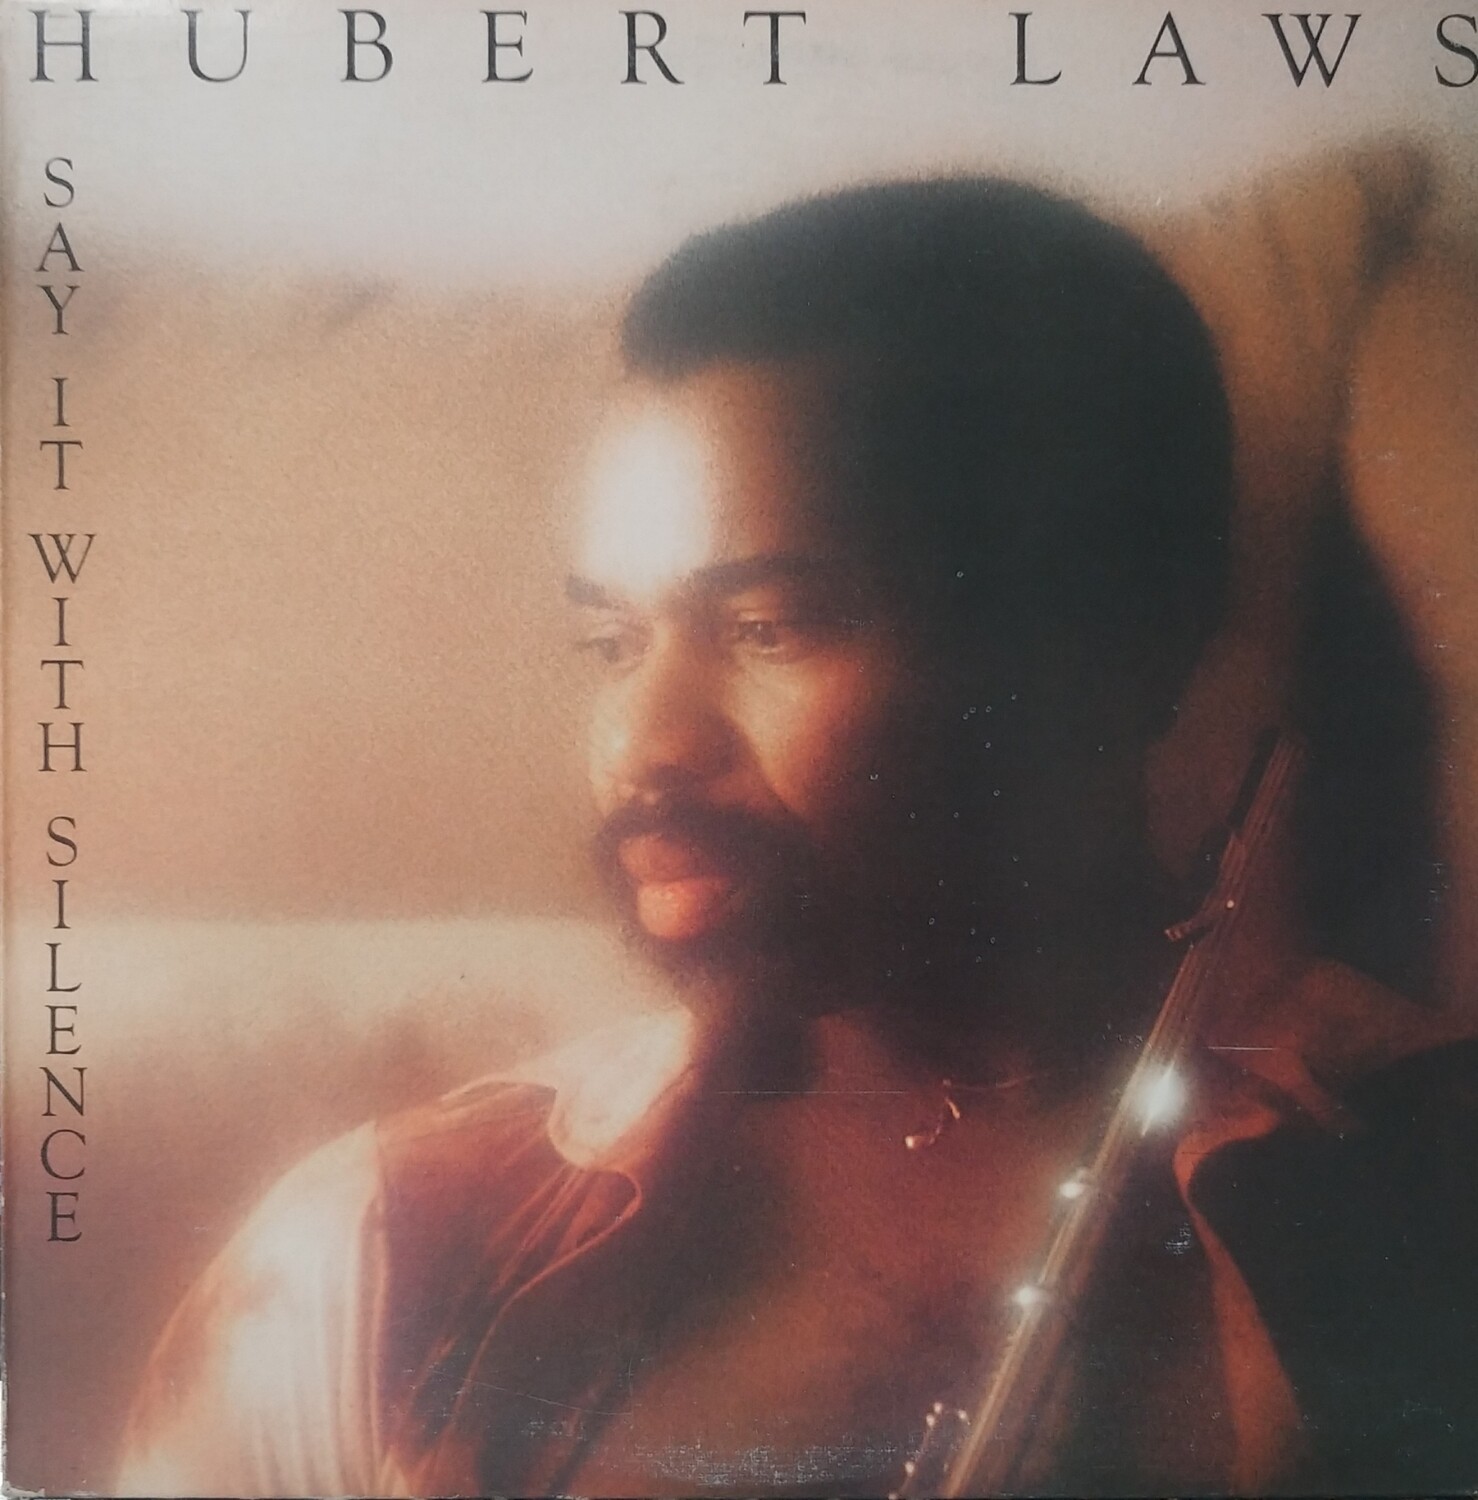 Hubert Laws - Say it with silence